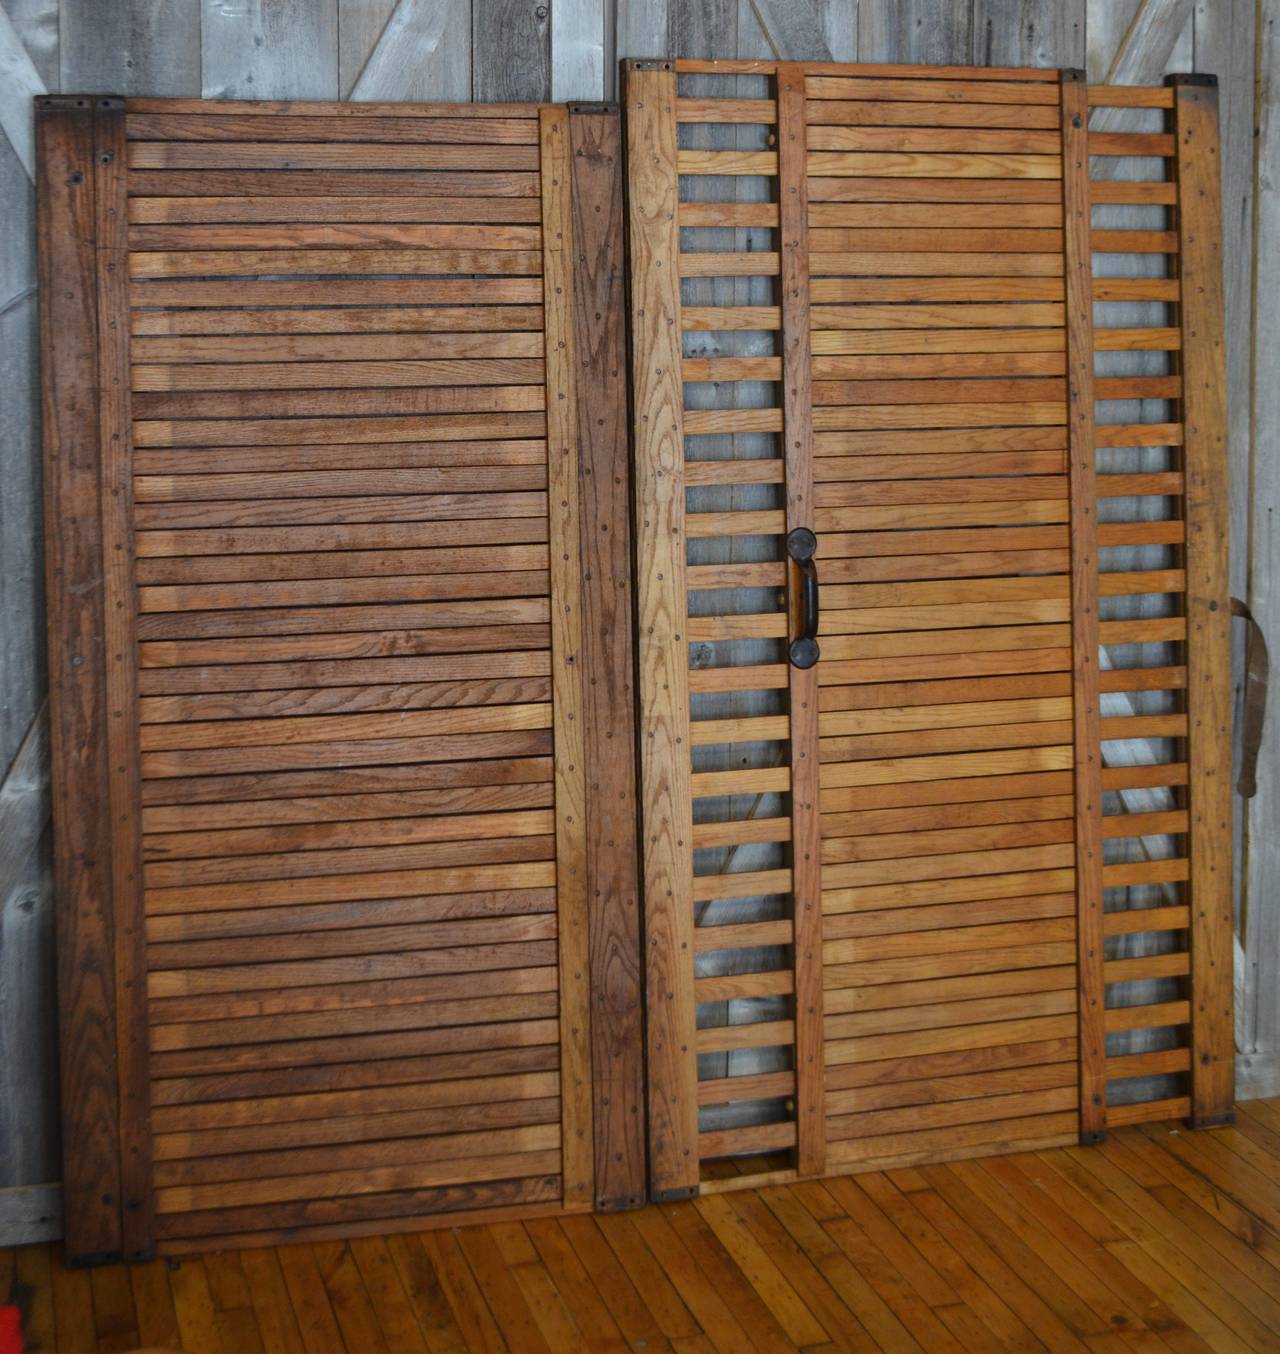 Pair of freight elevator gates of solid oak. Gate on the right expands on both sides with sliding oak panels, creating a lattice look.  Measures 38